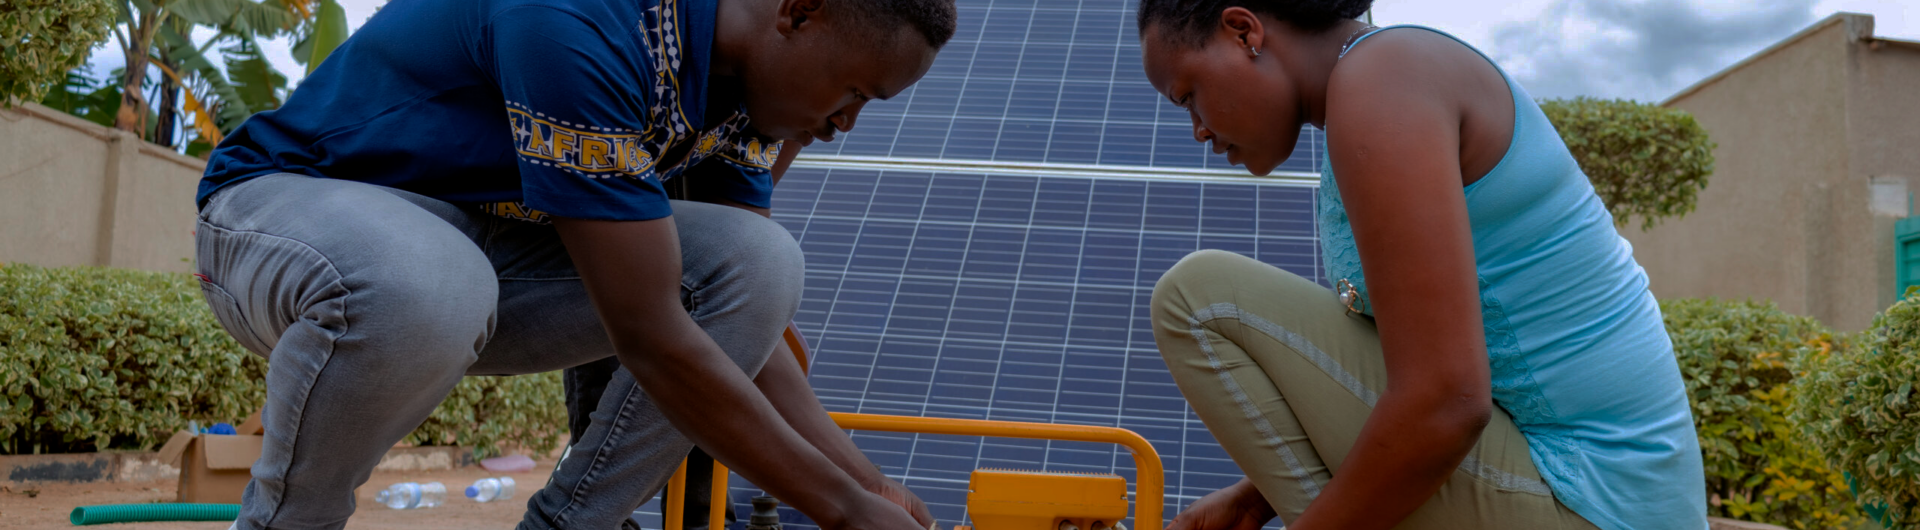 Rwandese youth working on a solar panel.